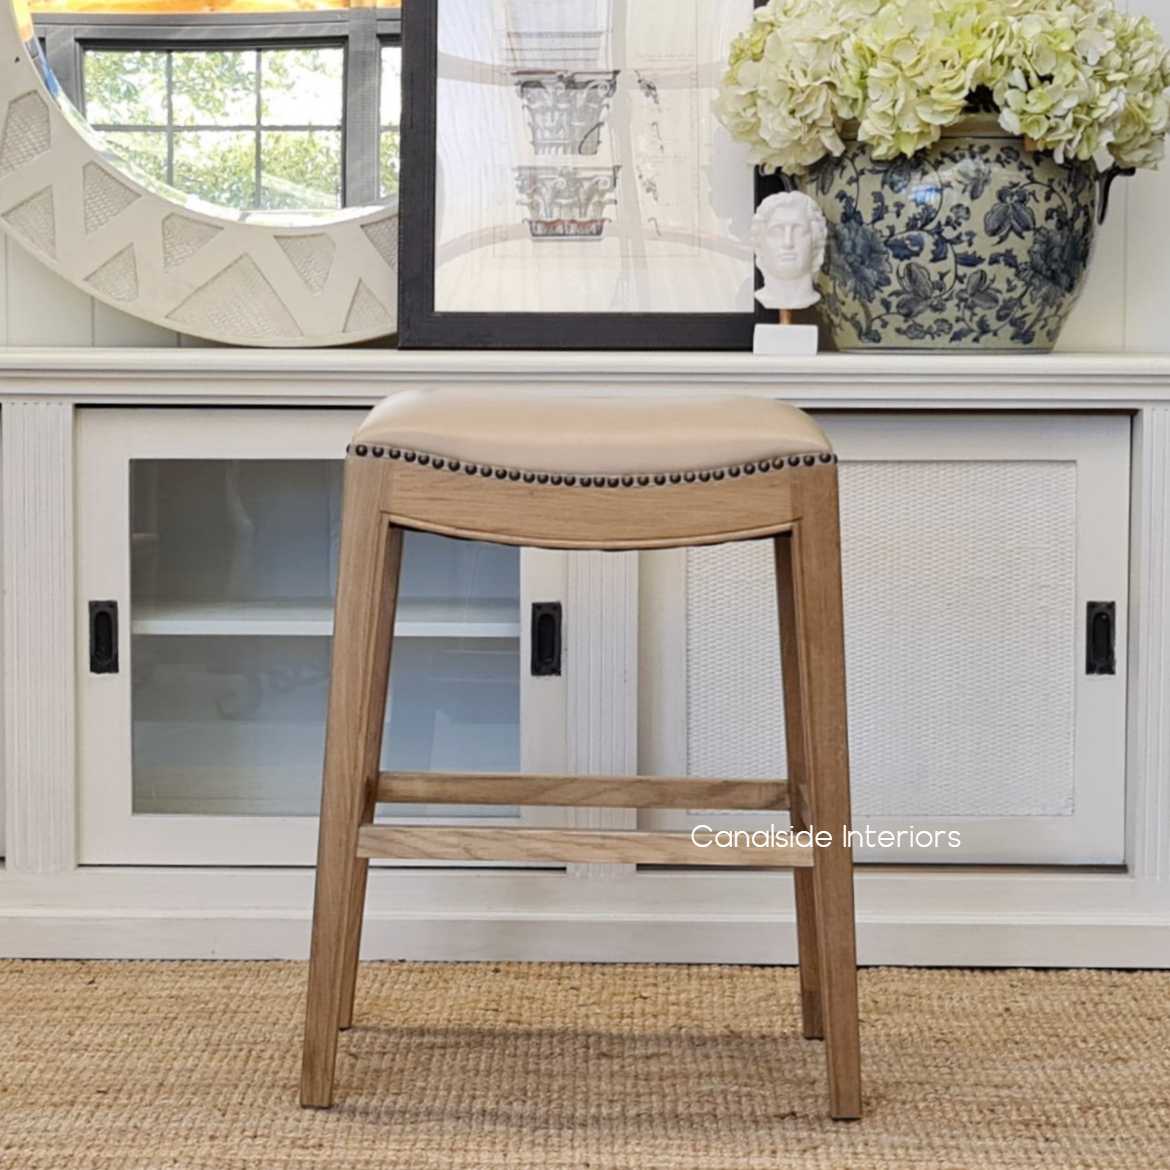 Mila II Leather Kitchen Bar Stool  FRENCH  FURNITURE, CHAIRS, HAMPTONS Style, PLANTATION Style, CHAIRS Dining, CHAIRS Stools